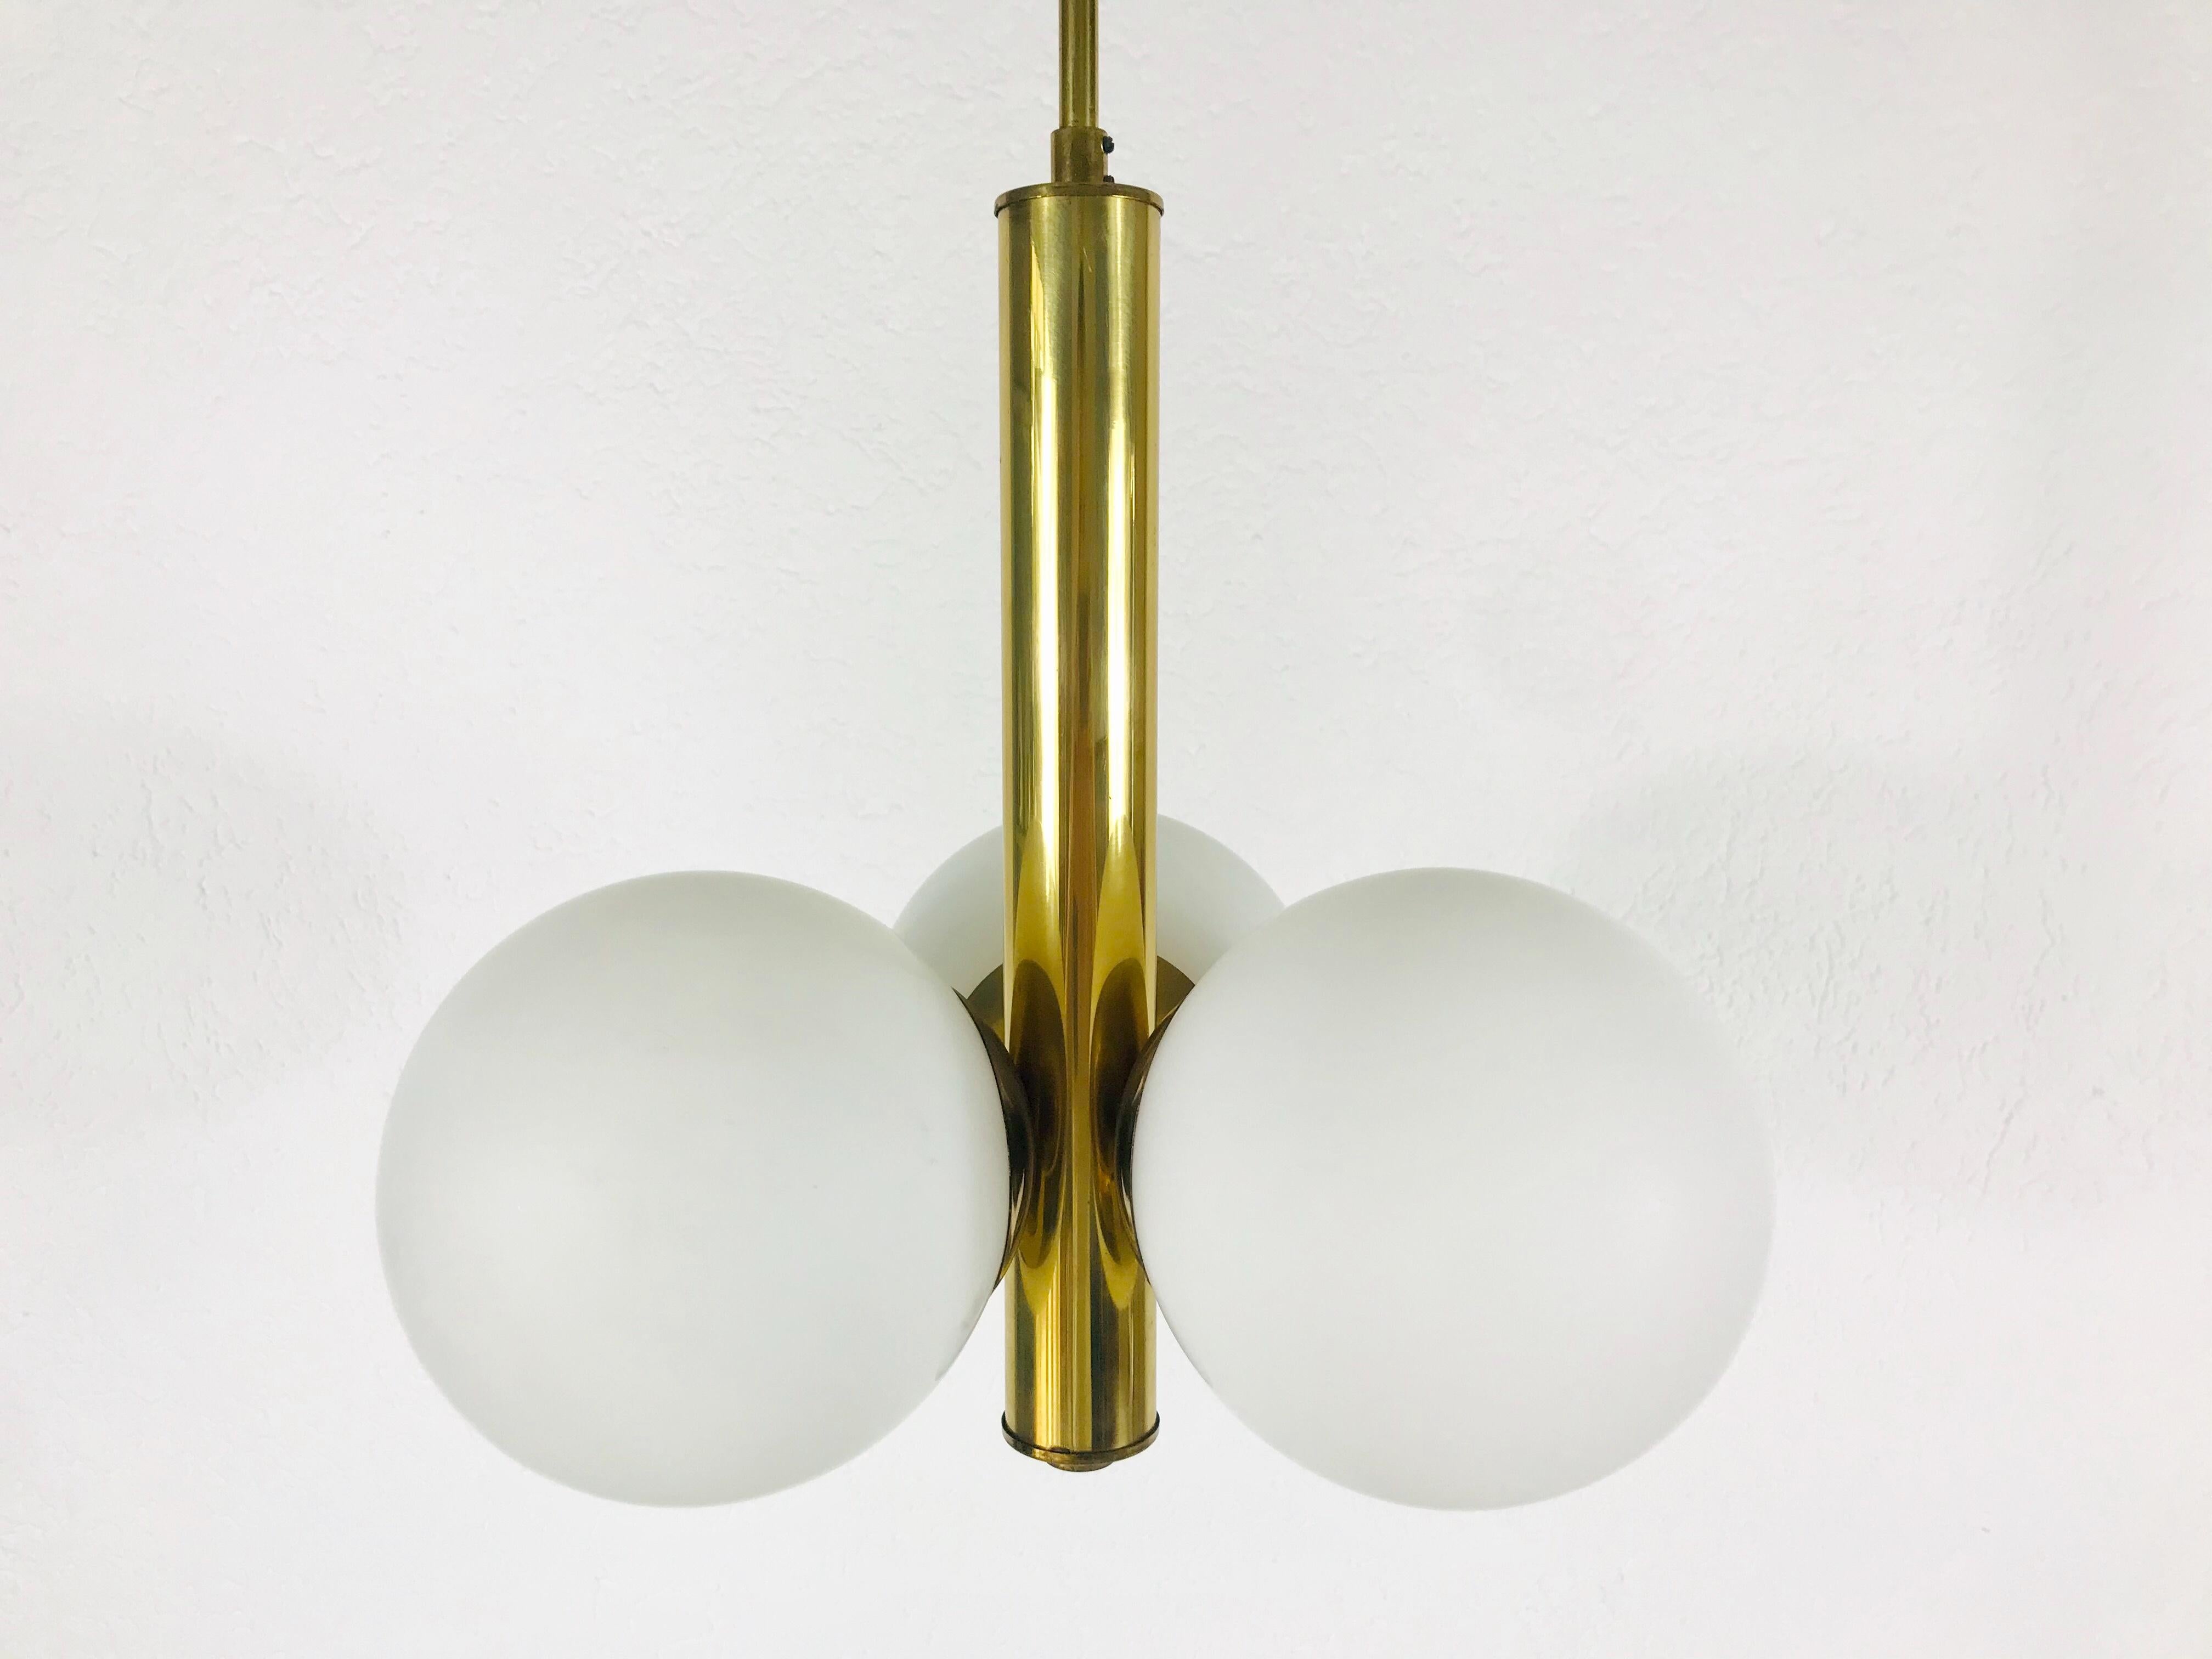 A midcentury Kaiser chandelier made in Germany in the 1960s. It is fascinating with its Space Age design and three opaline glass balls. The body of the light is made of polished brass, including the arms. 

The light requires three E14 light bulbs.